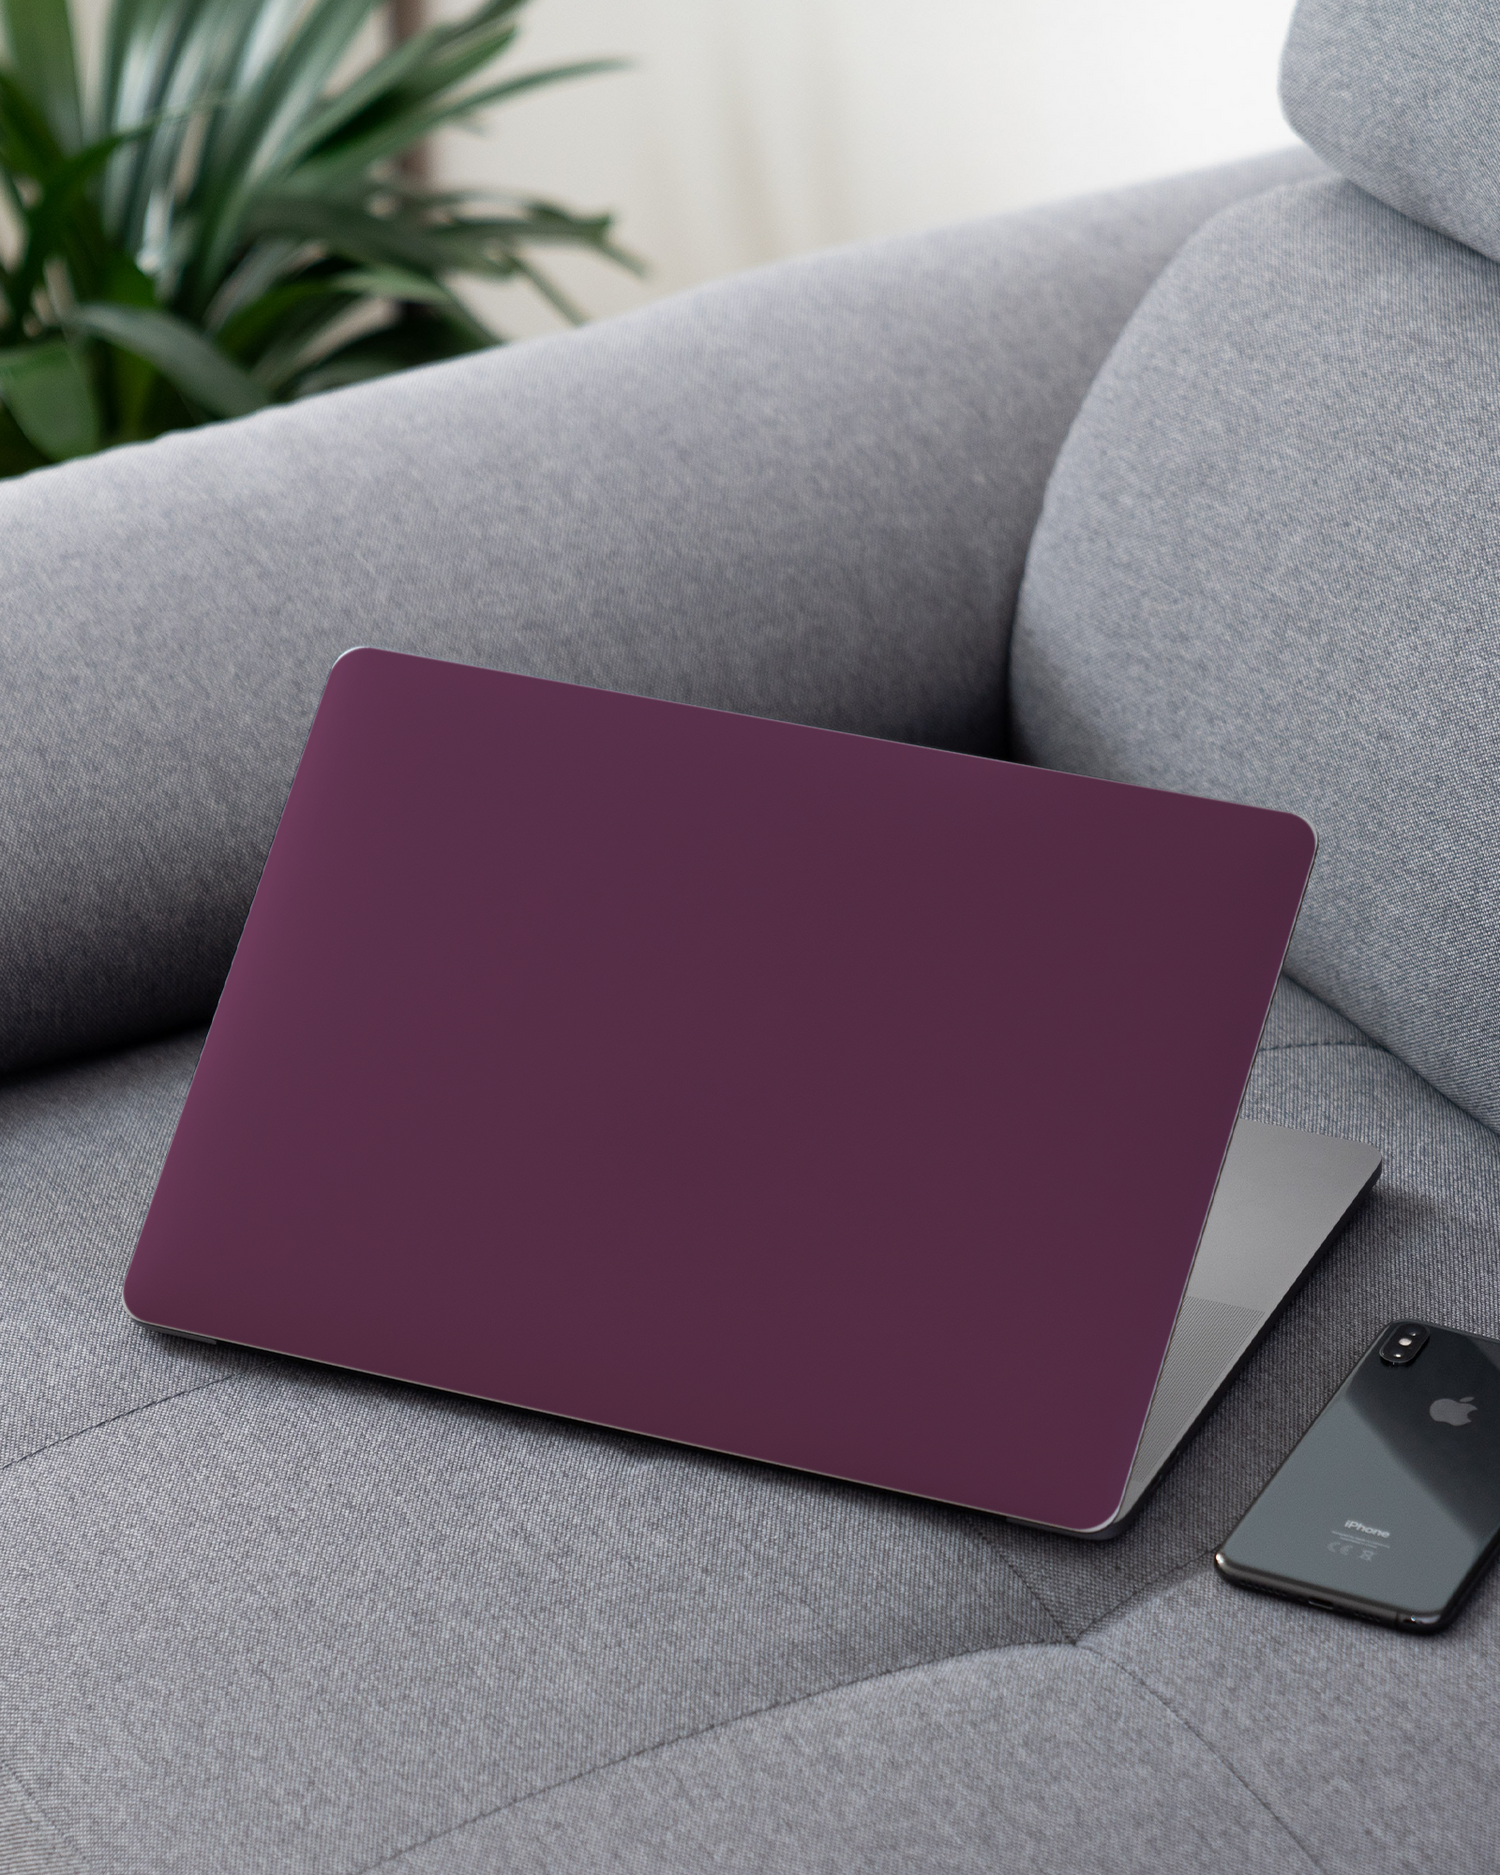 PLUM Laptop Skin for 13 inch Apple MacBooks on a couch